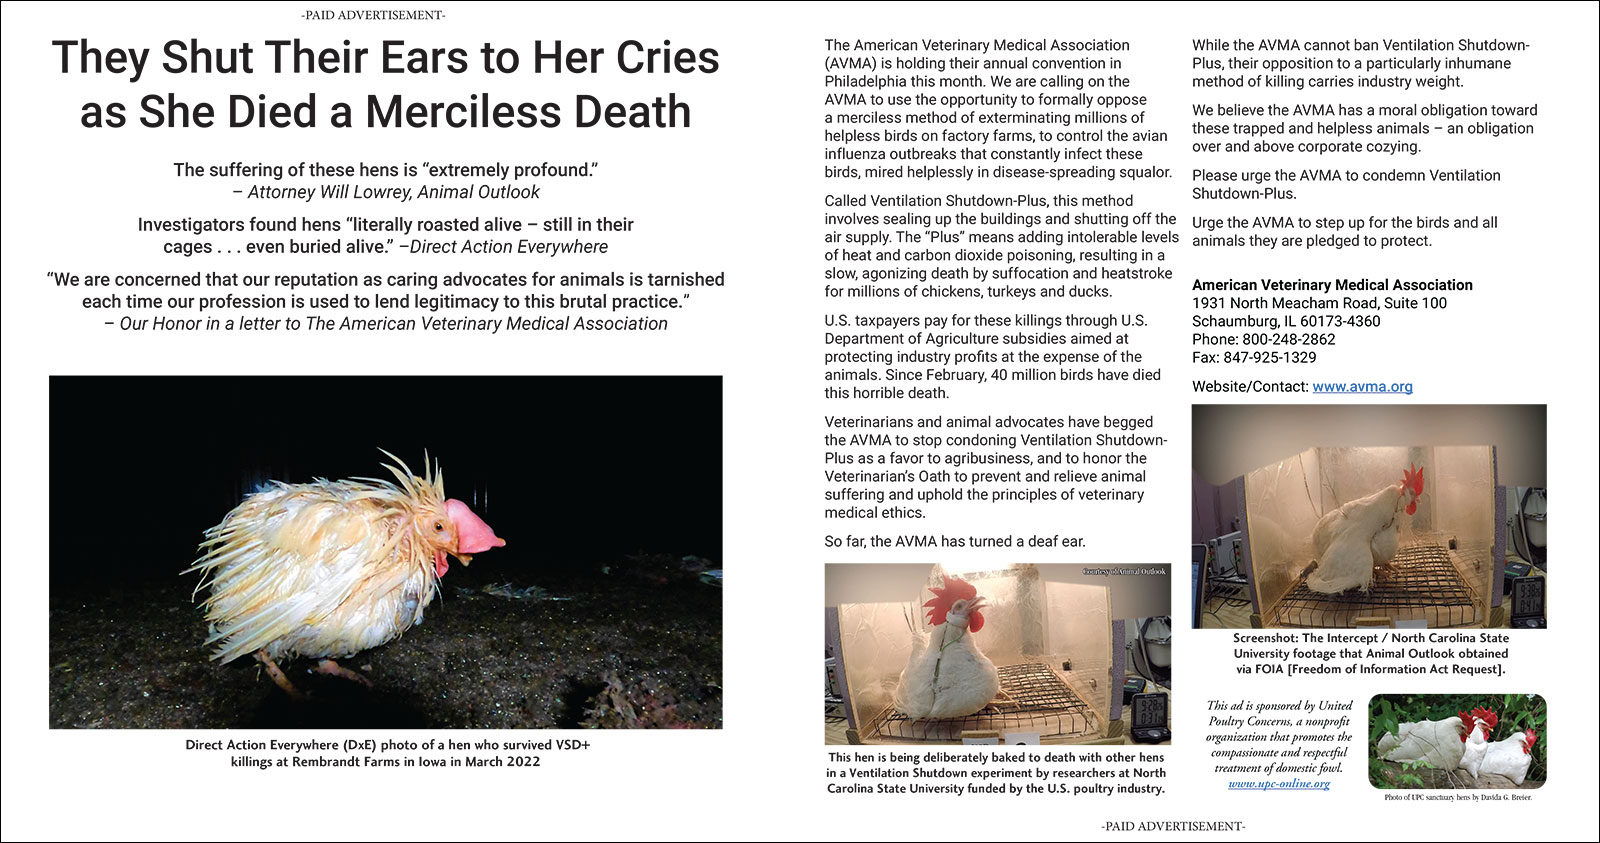 They Shut Their Ears to Her Cries as She Died a Merciless Death - Center Spread